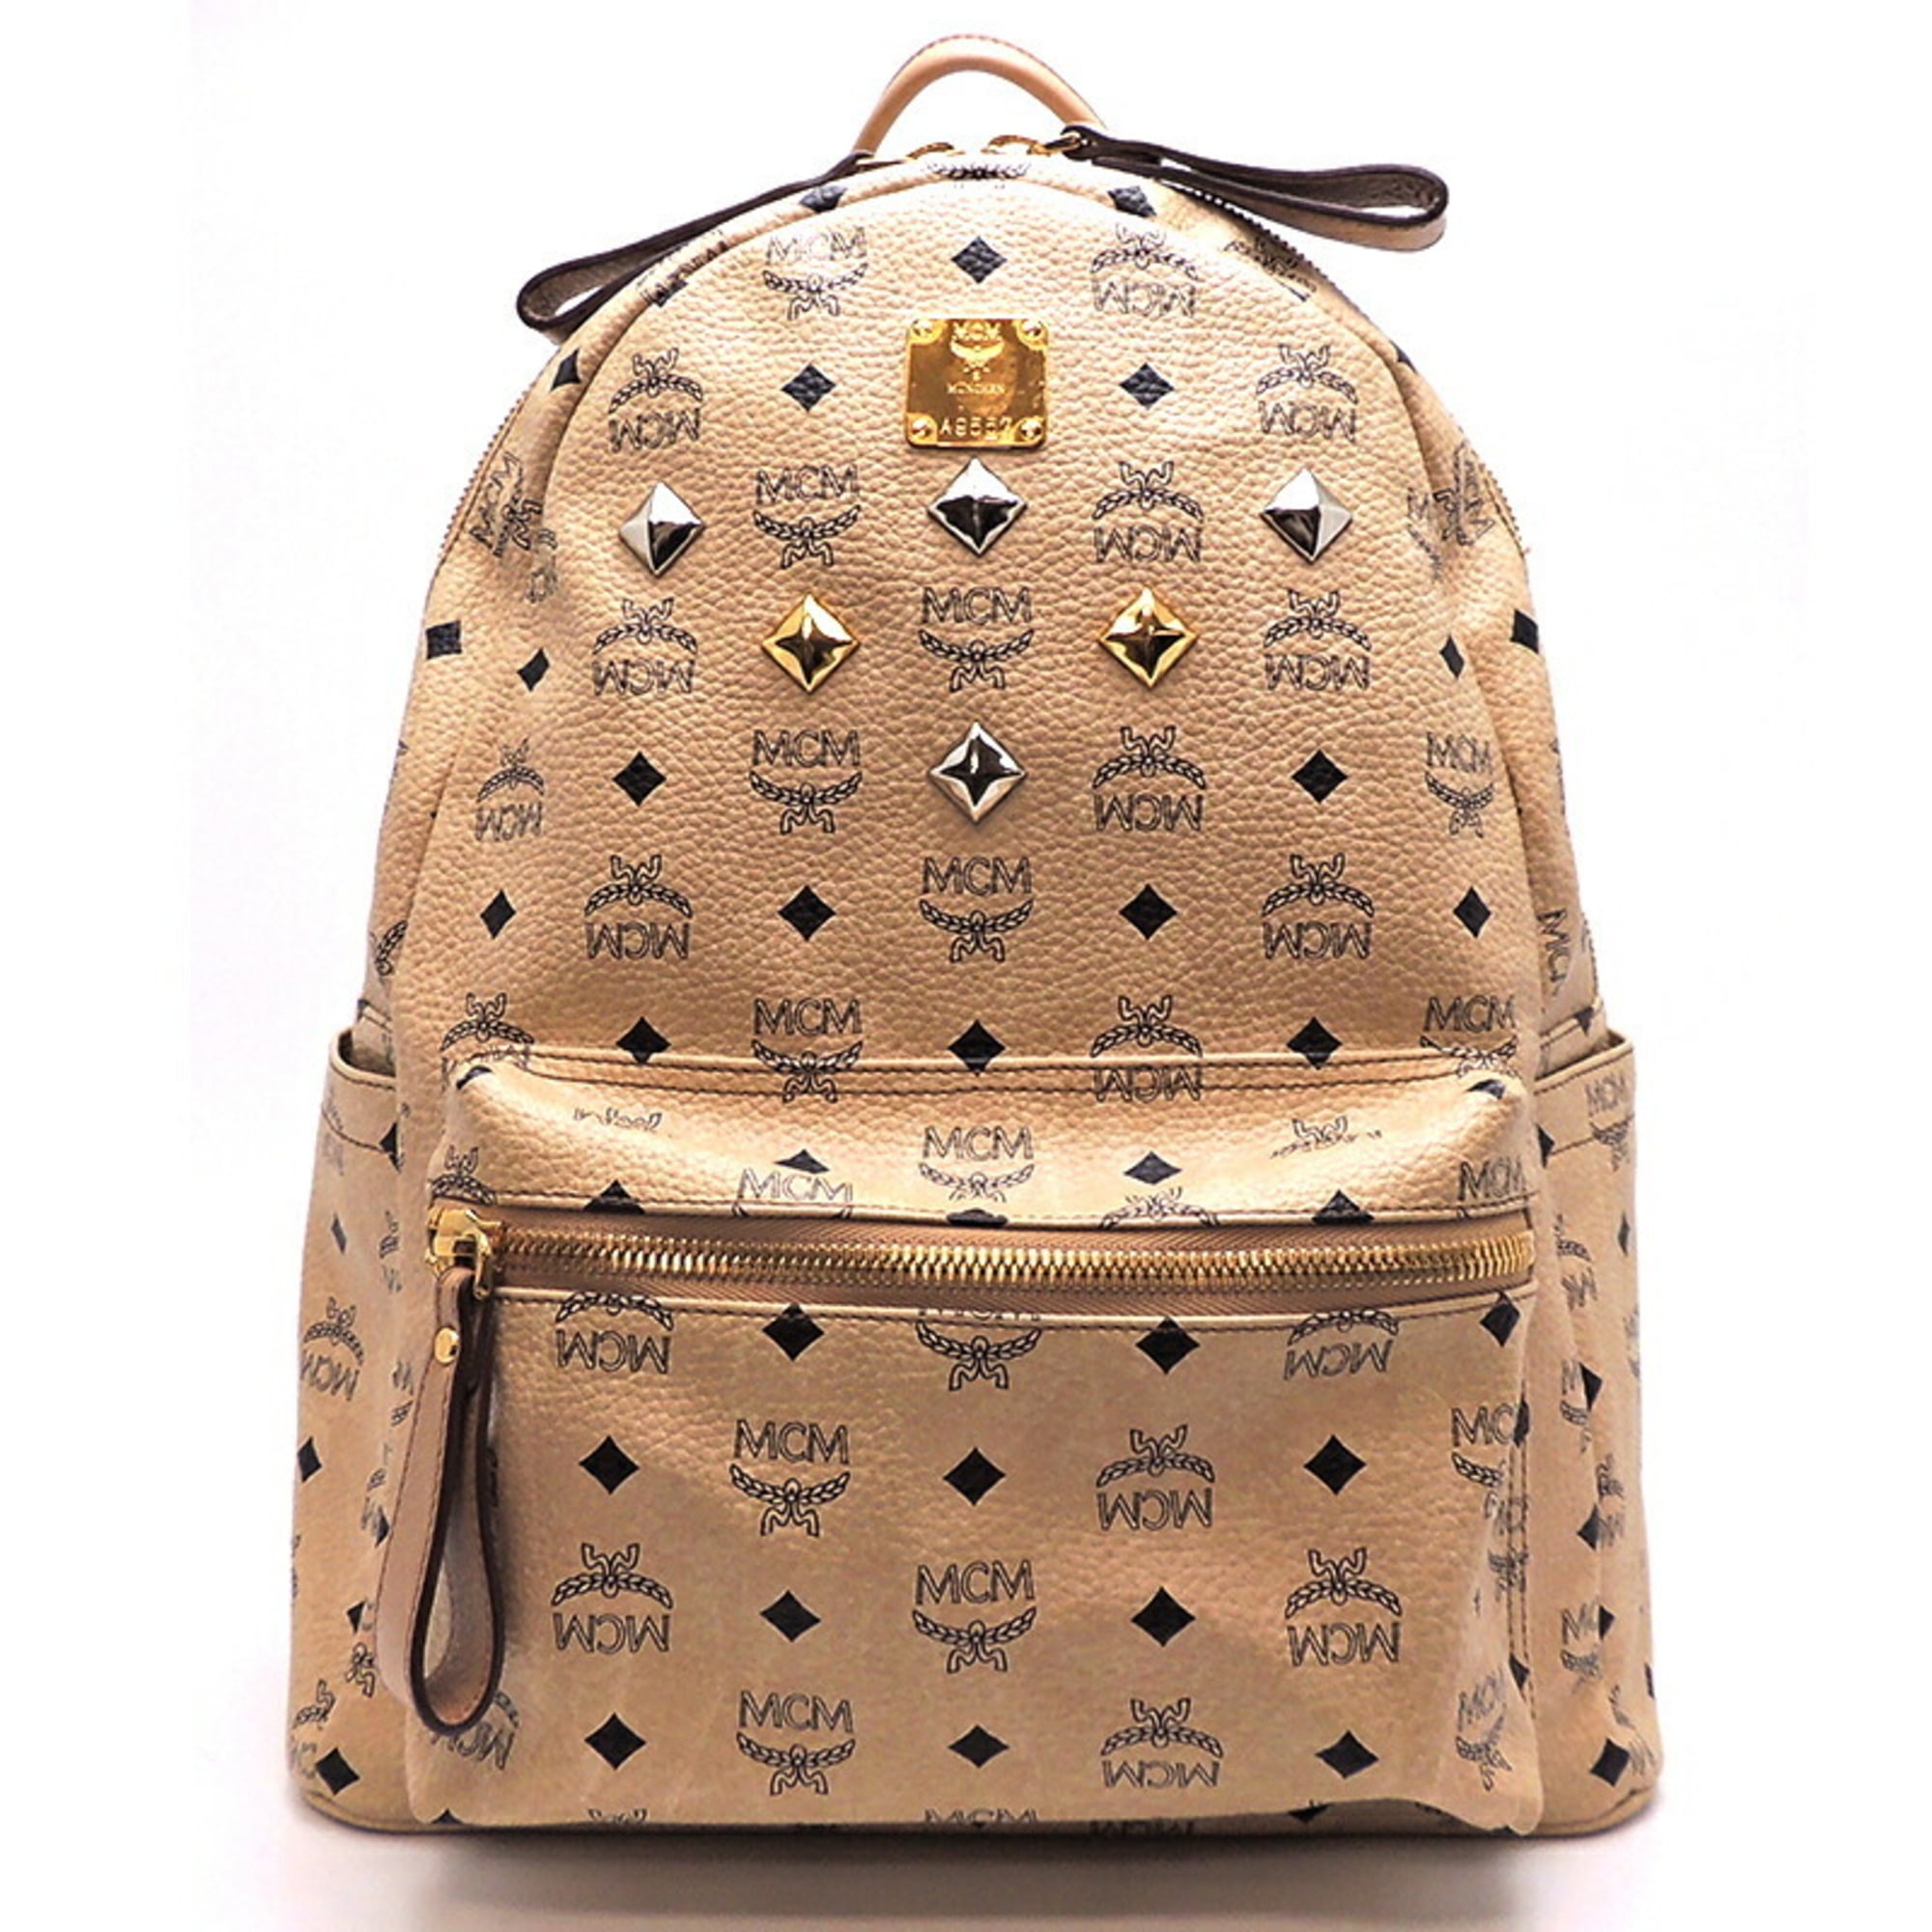 Authenticated Used MCM Studs Backpack Women's/Men's Rucksack/Daypack ...